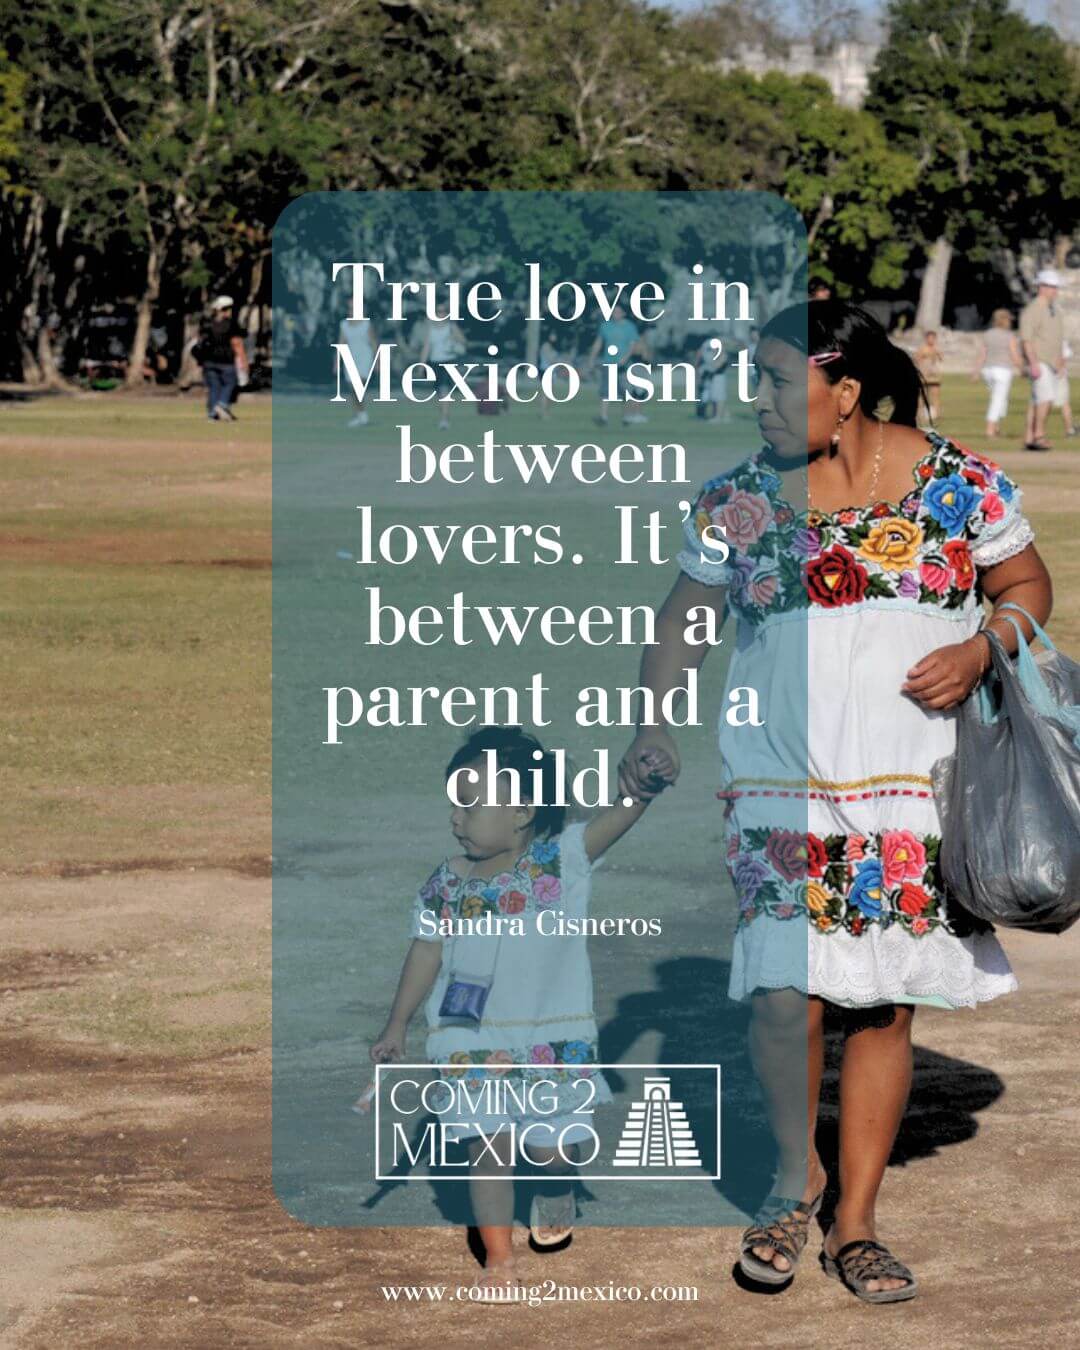 True love in Mexico isn’t between lovers. It’s between a parent and a child. - Sandra Cisneros